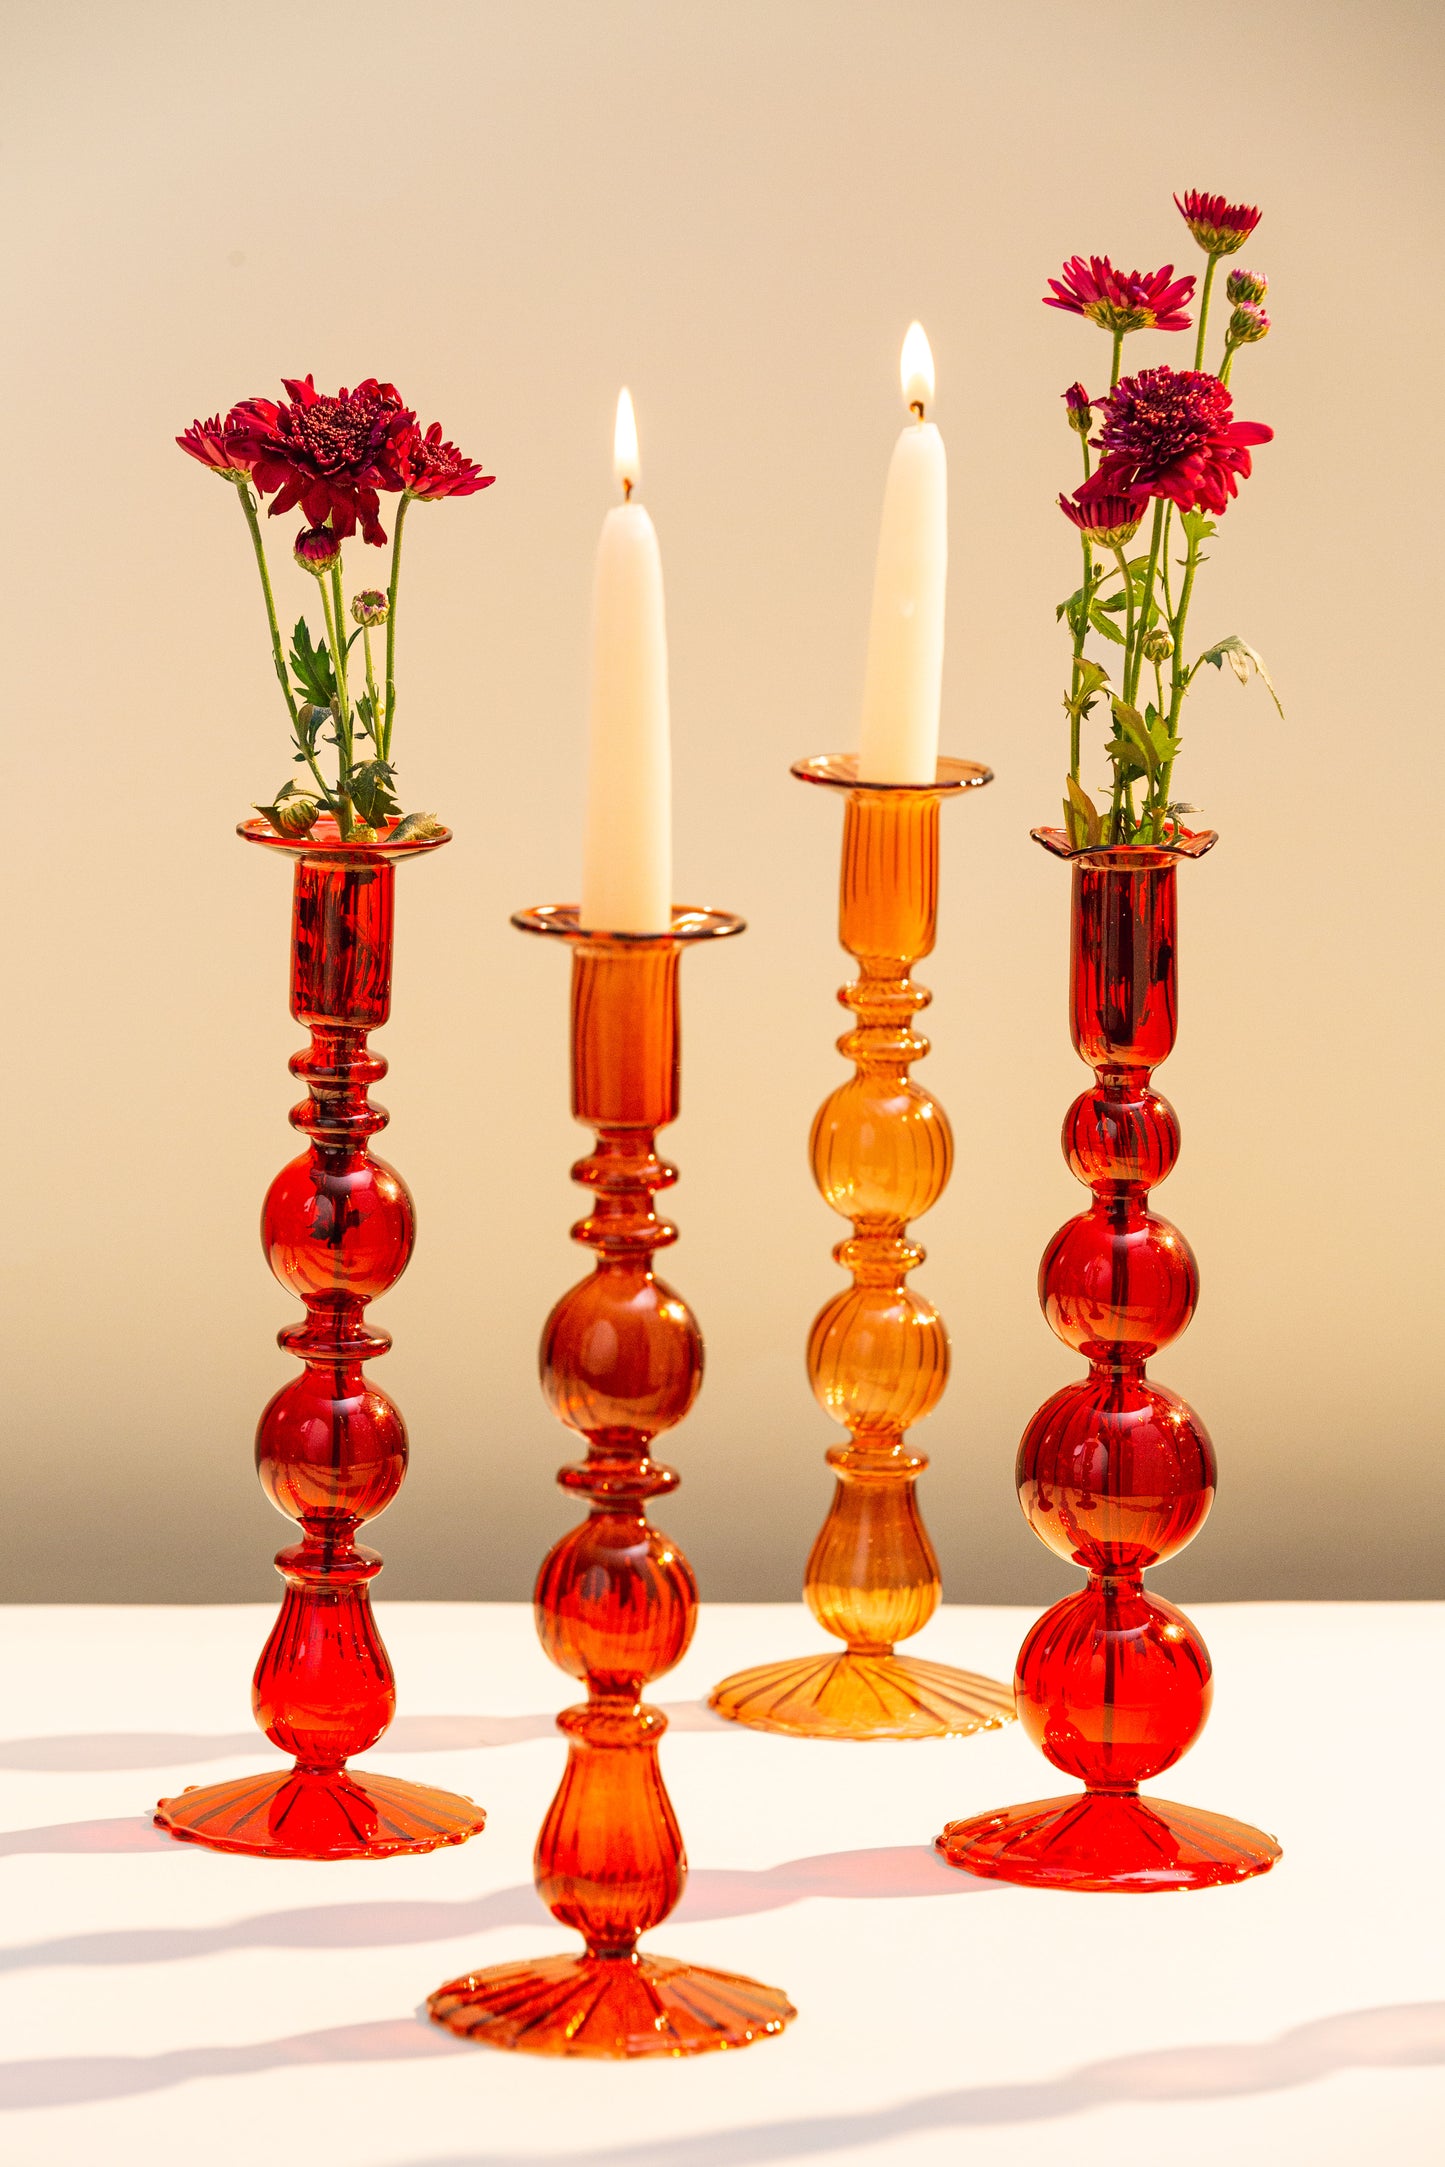 THE DOUBLE FUN CANDLEHOLDER